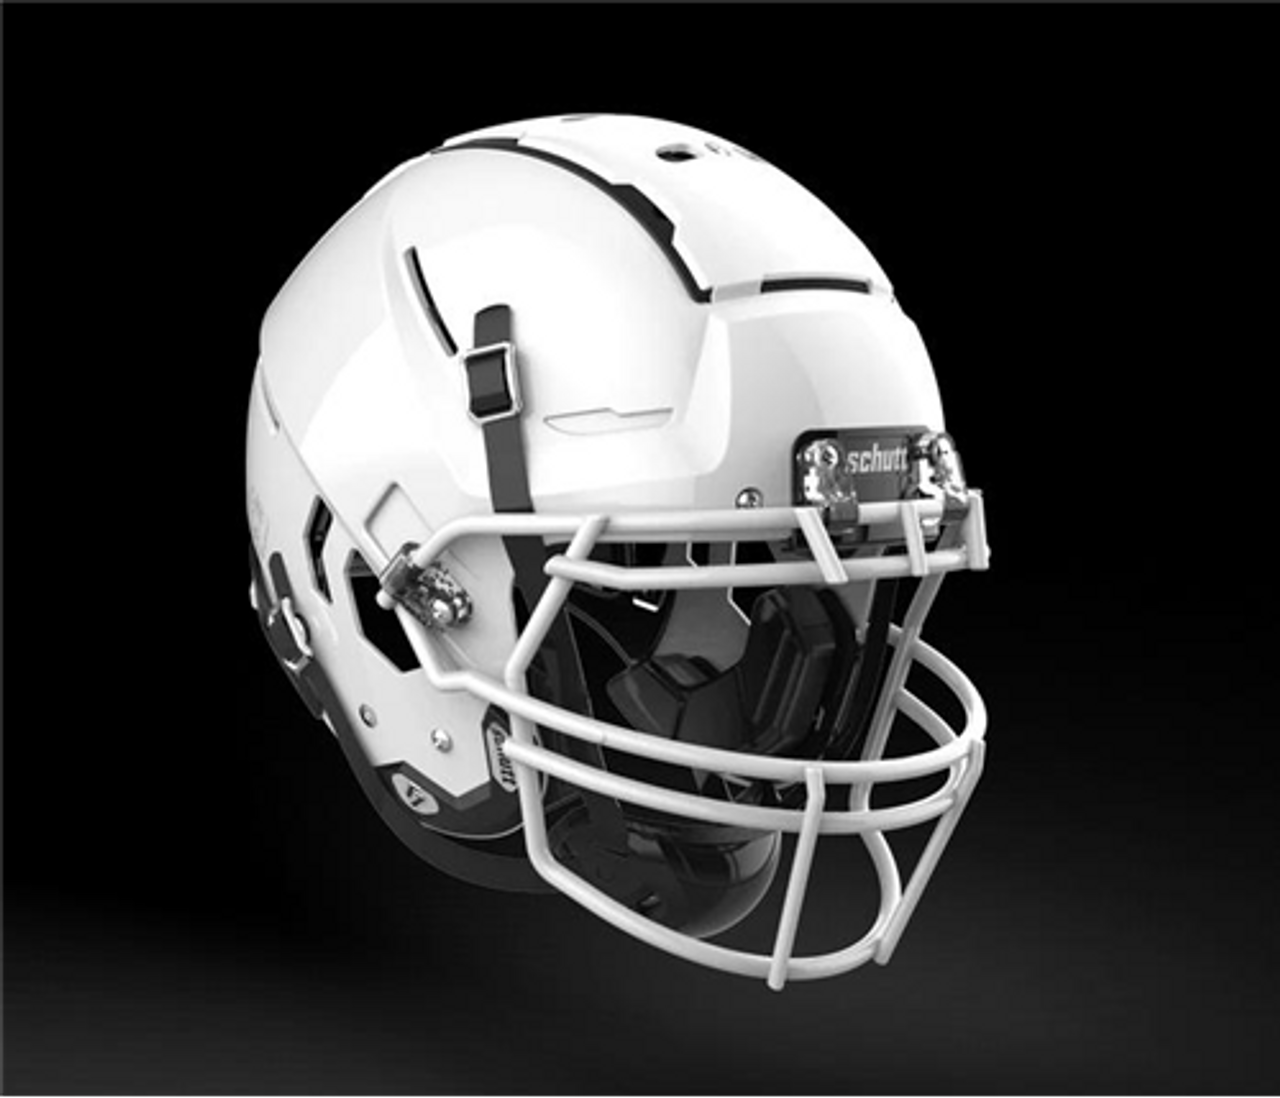 Revolutionizing Safety: An In-depth Look at the F7 Football Helmet